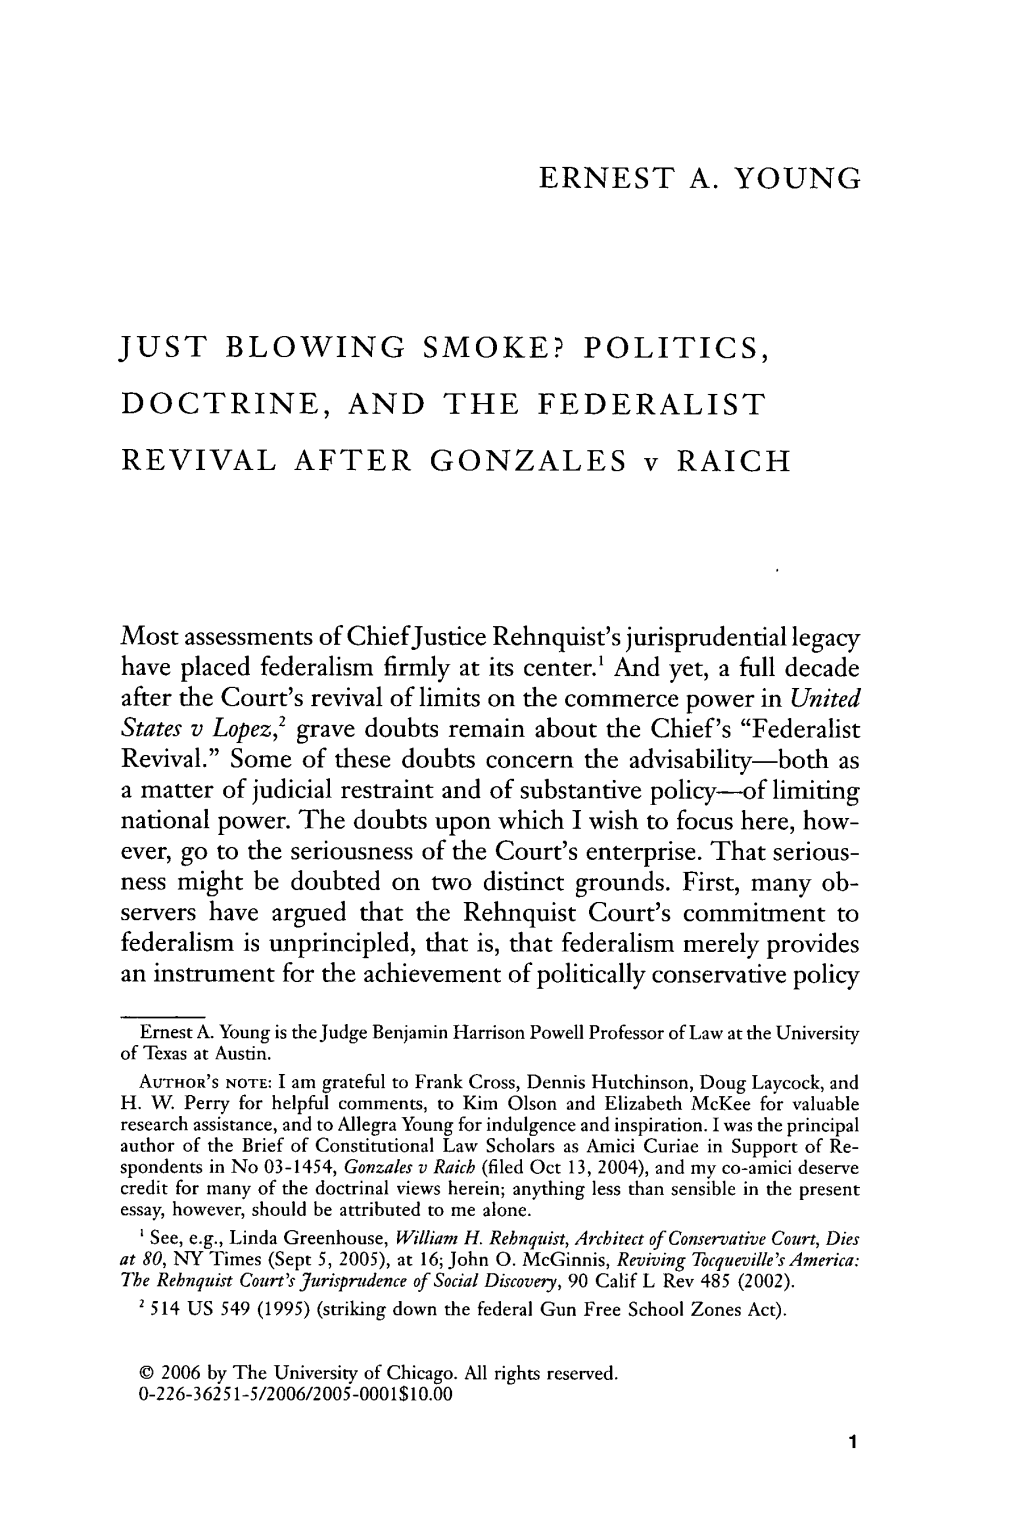 Politics, Doctrine, and the Federalist Revival After Gonzales V. Raich